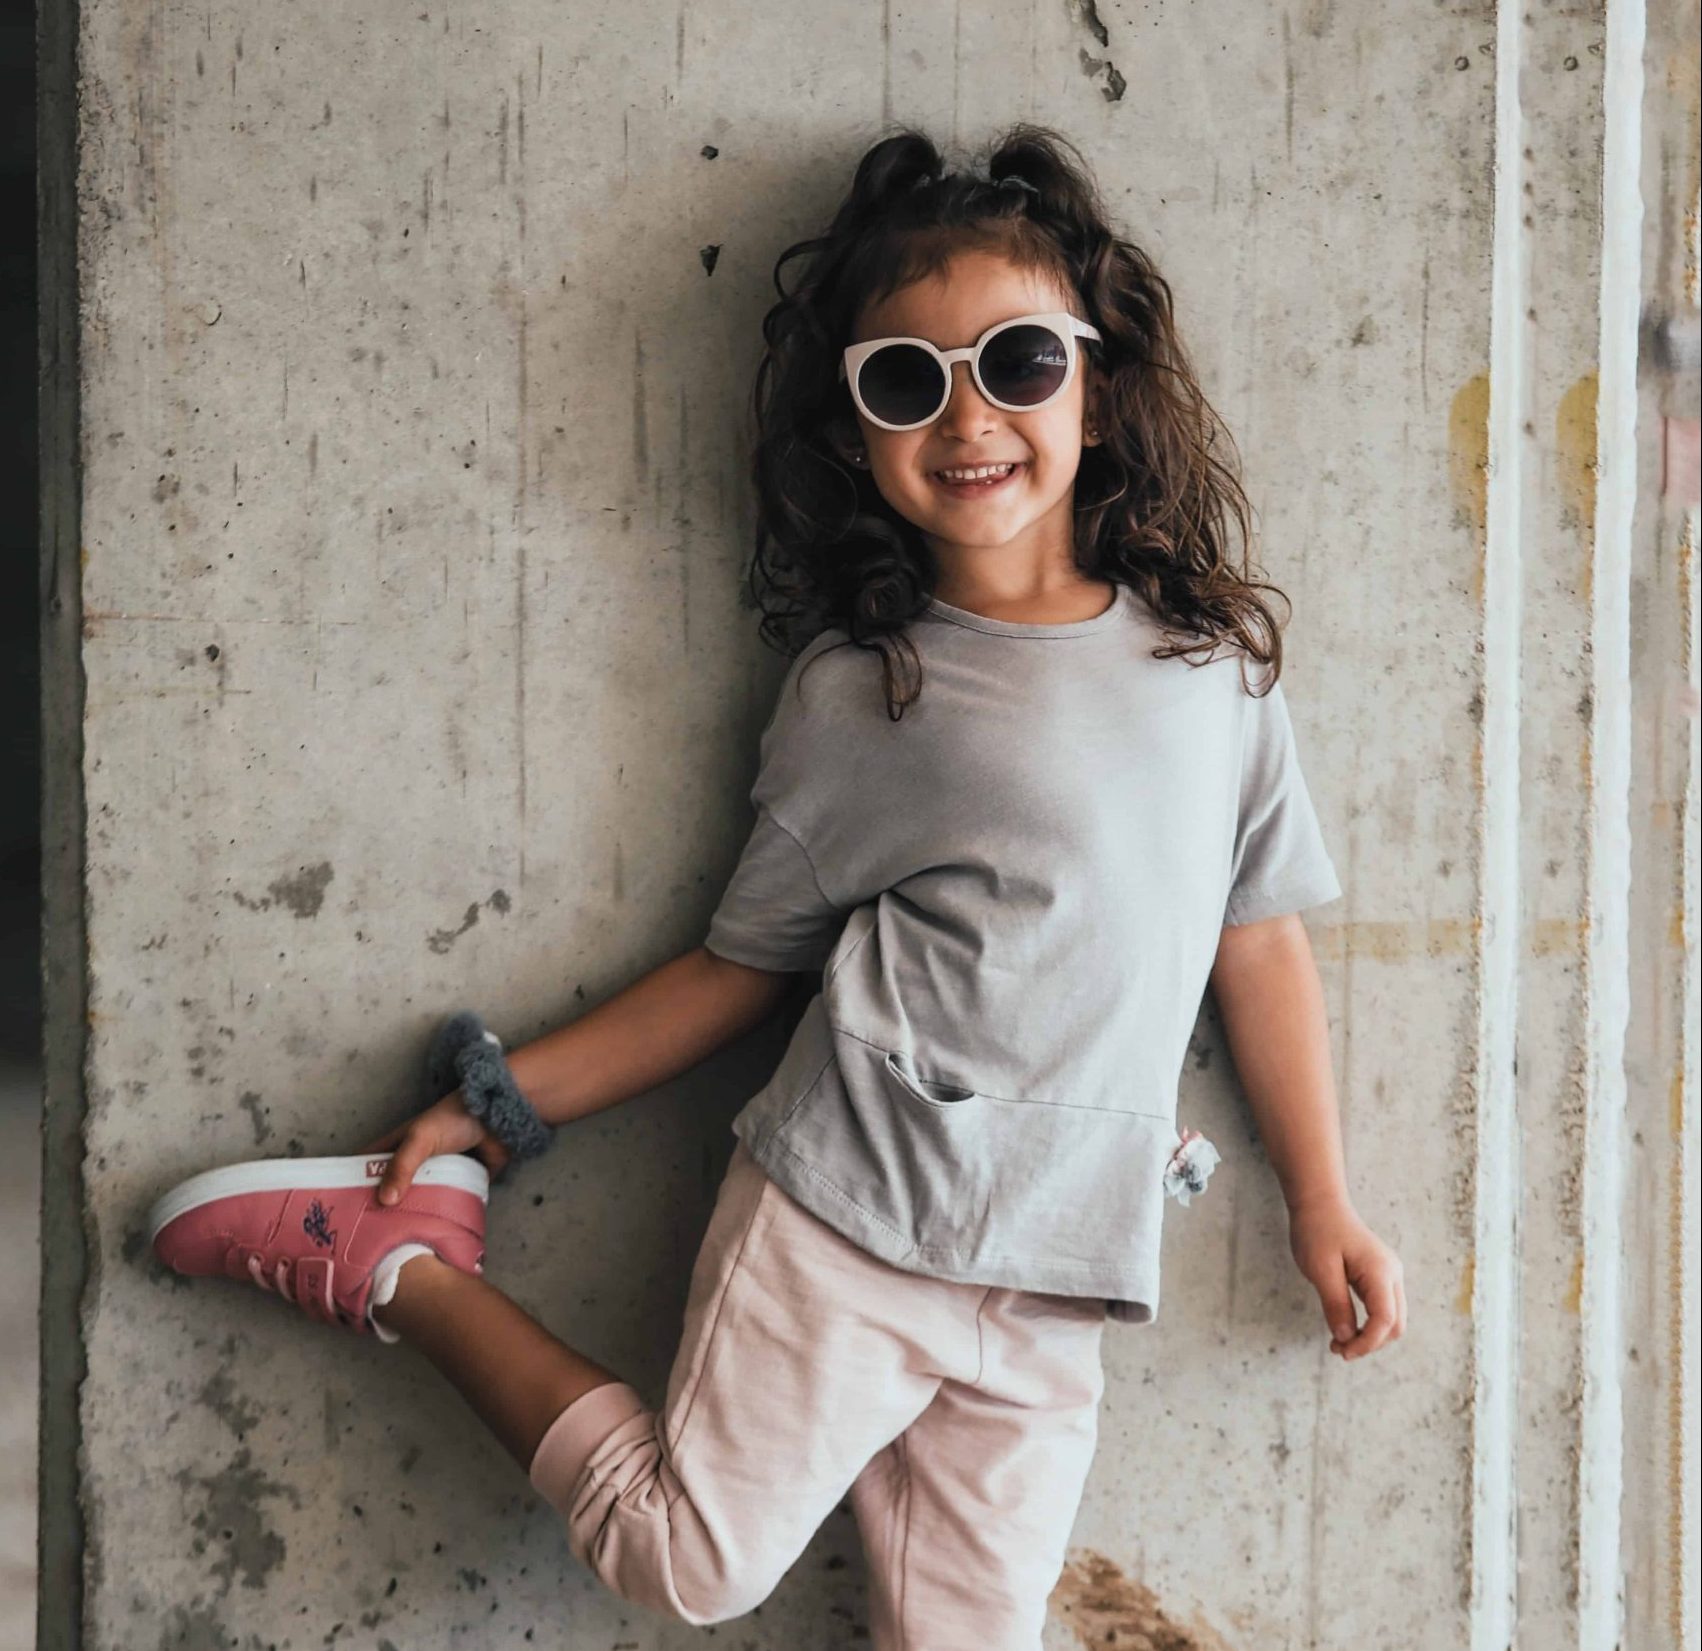 How to get started in child modeling